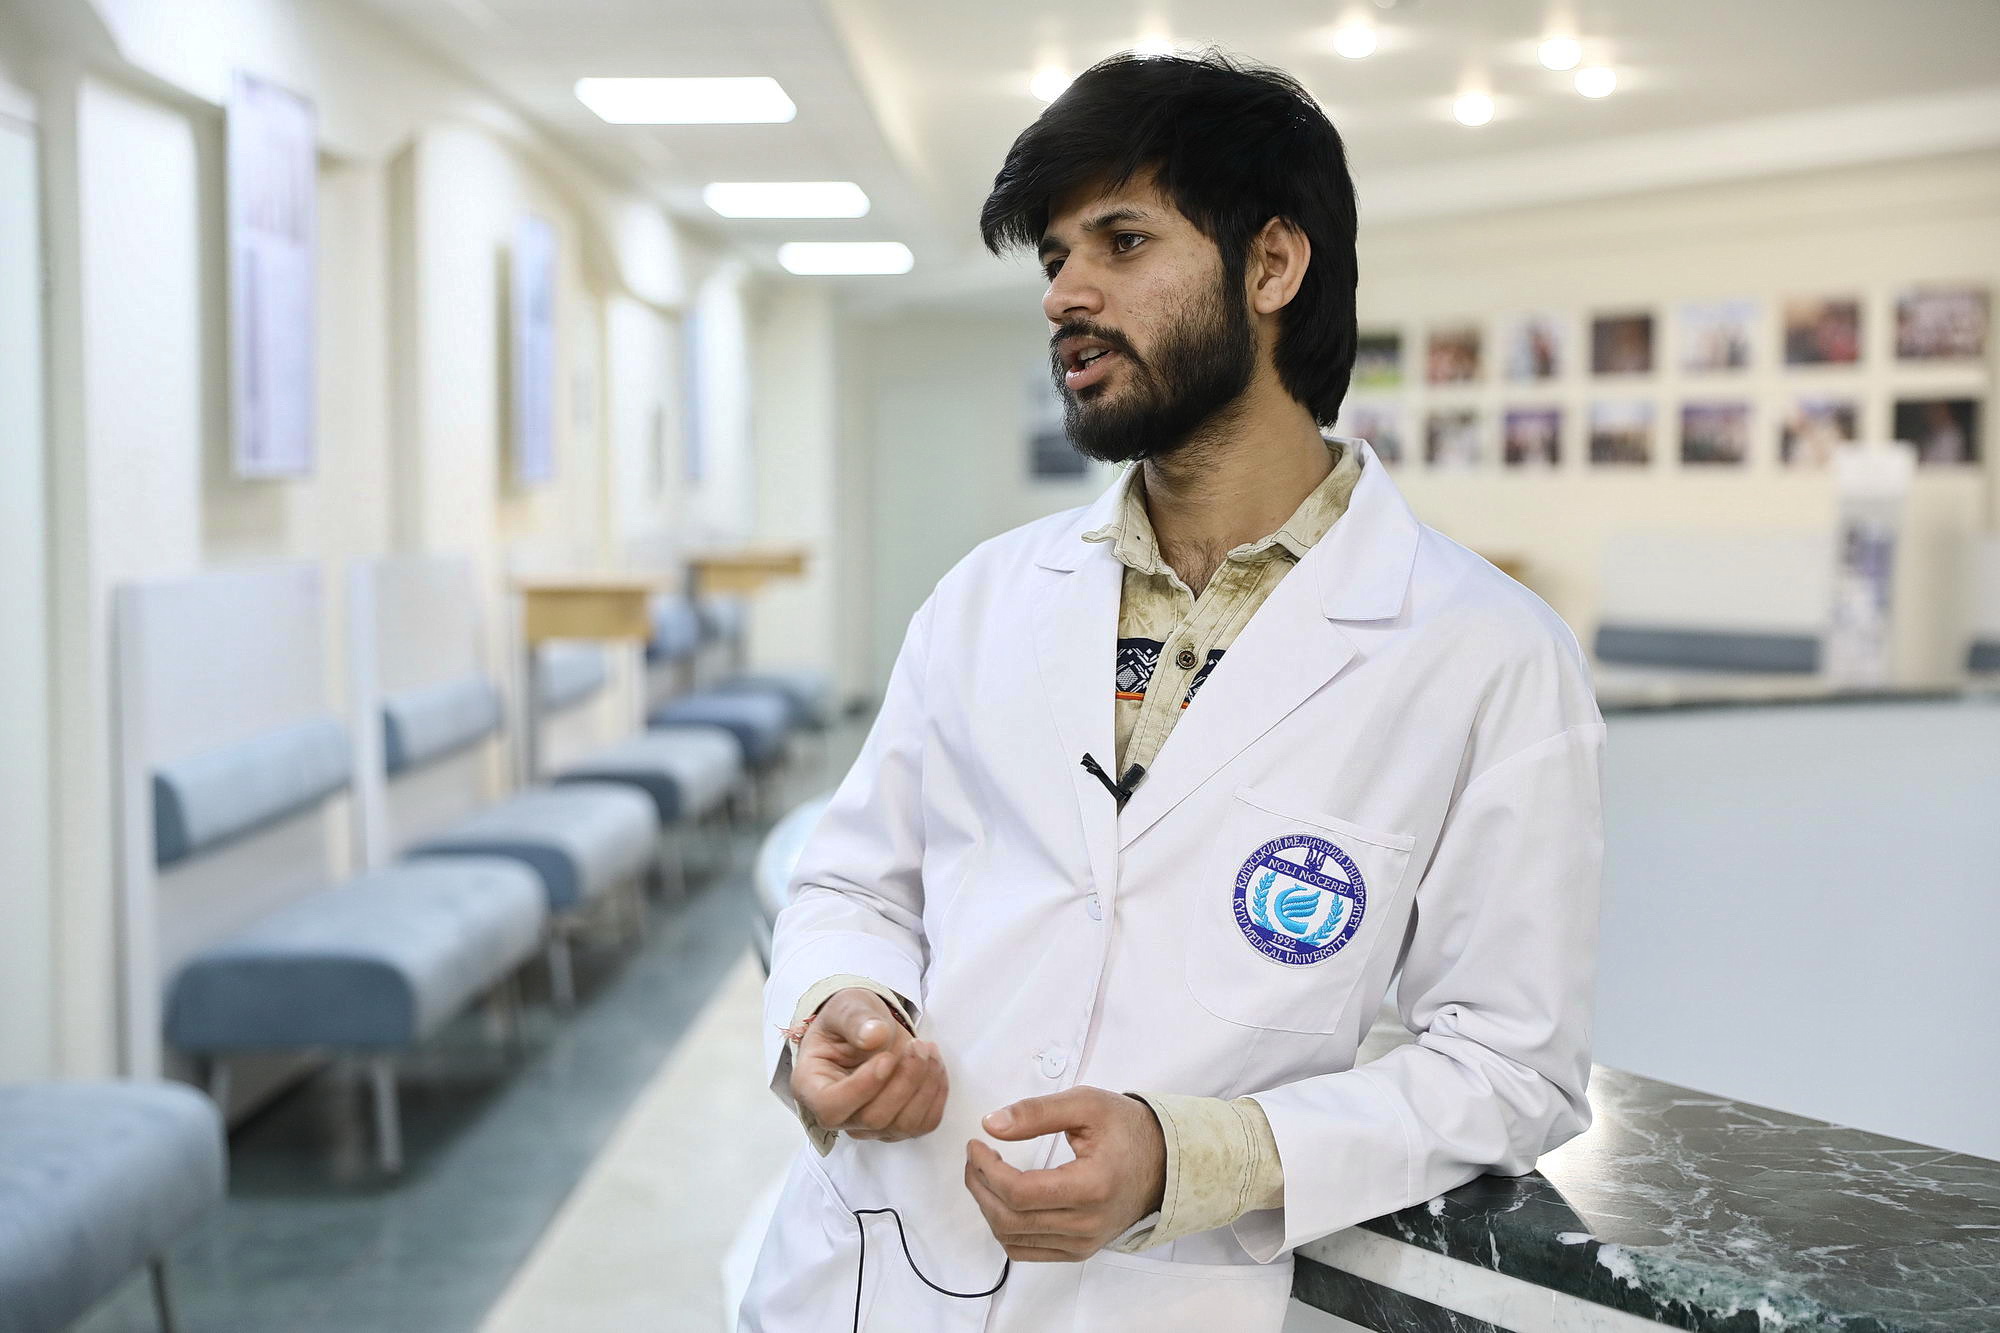 Tarun Singh, 21, a third-year Indian student at Kyiv Medical University, who dreams of becoming a surgeon after graduation, speaks to the Kyiv Post on Jan. 17, 2020. (Oleg Petrasiuk)